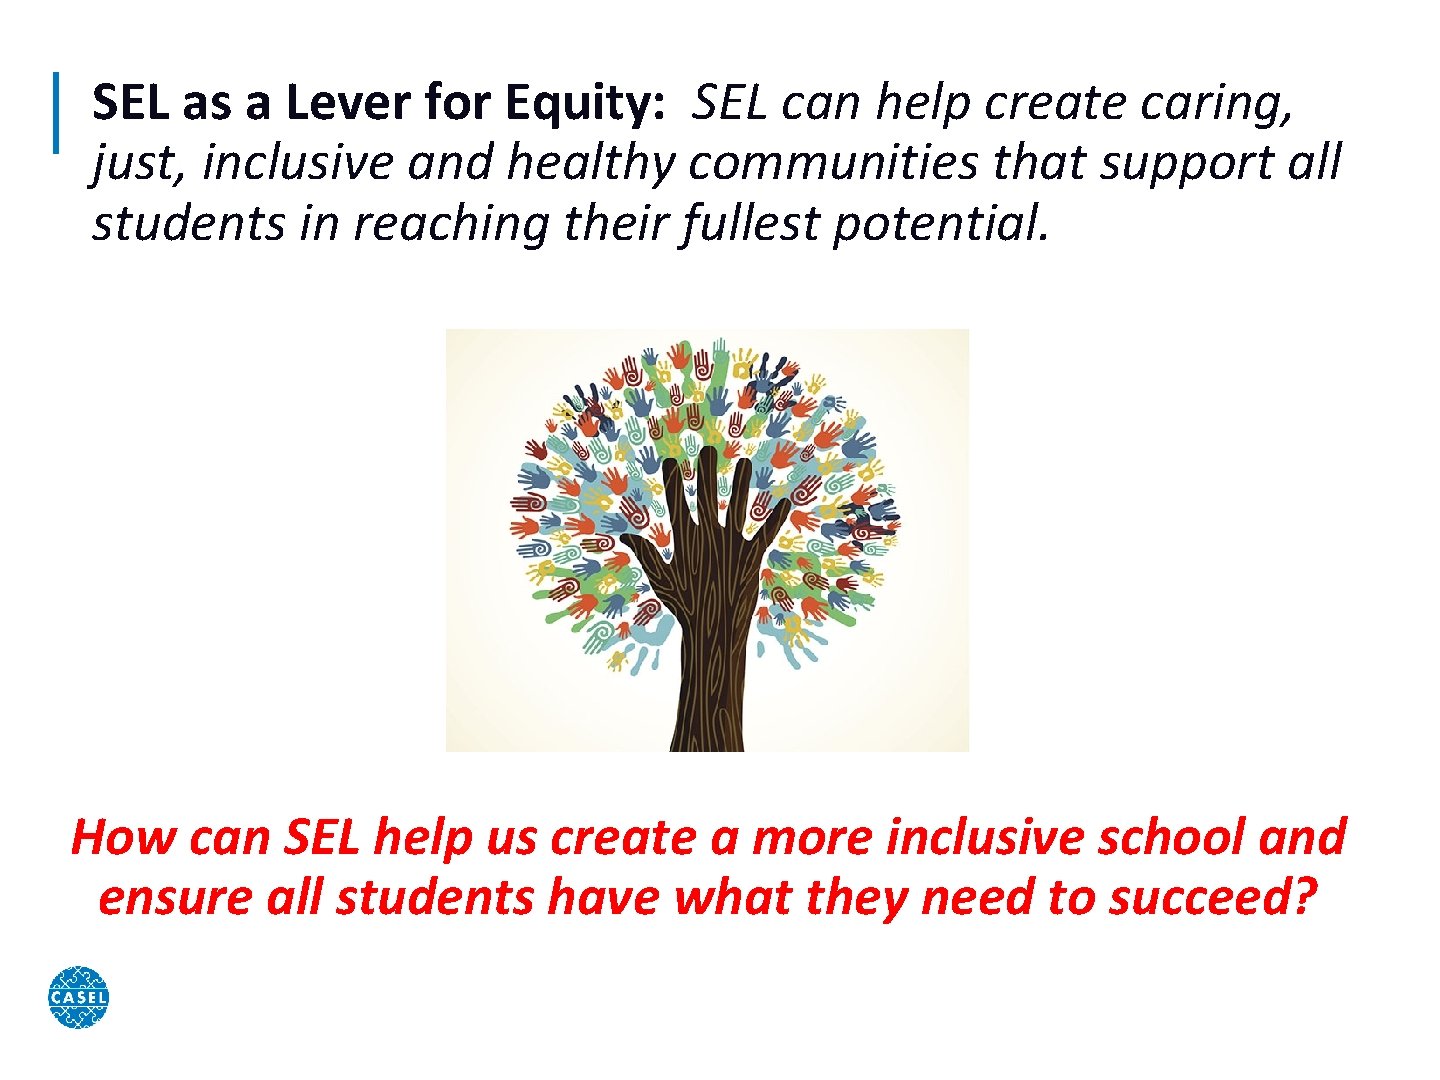 SEL as a Lever for Equity: SEL can help create caring, just, inclusive and